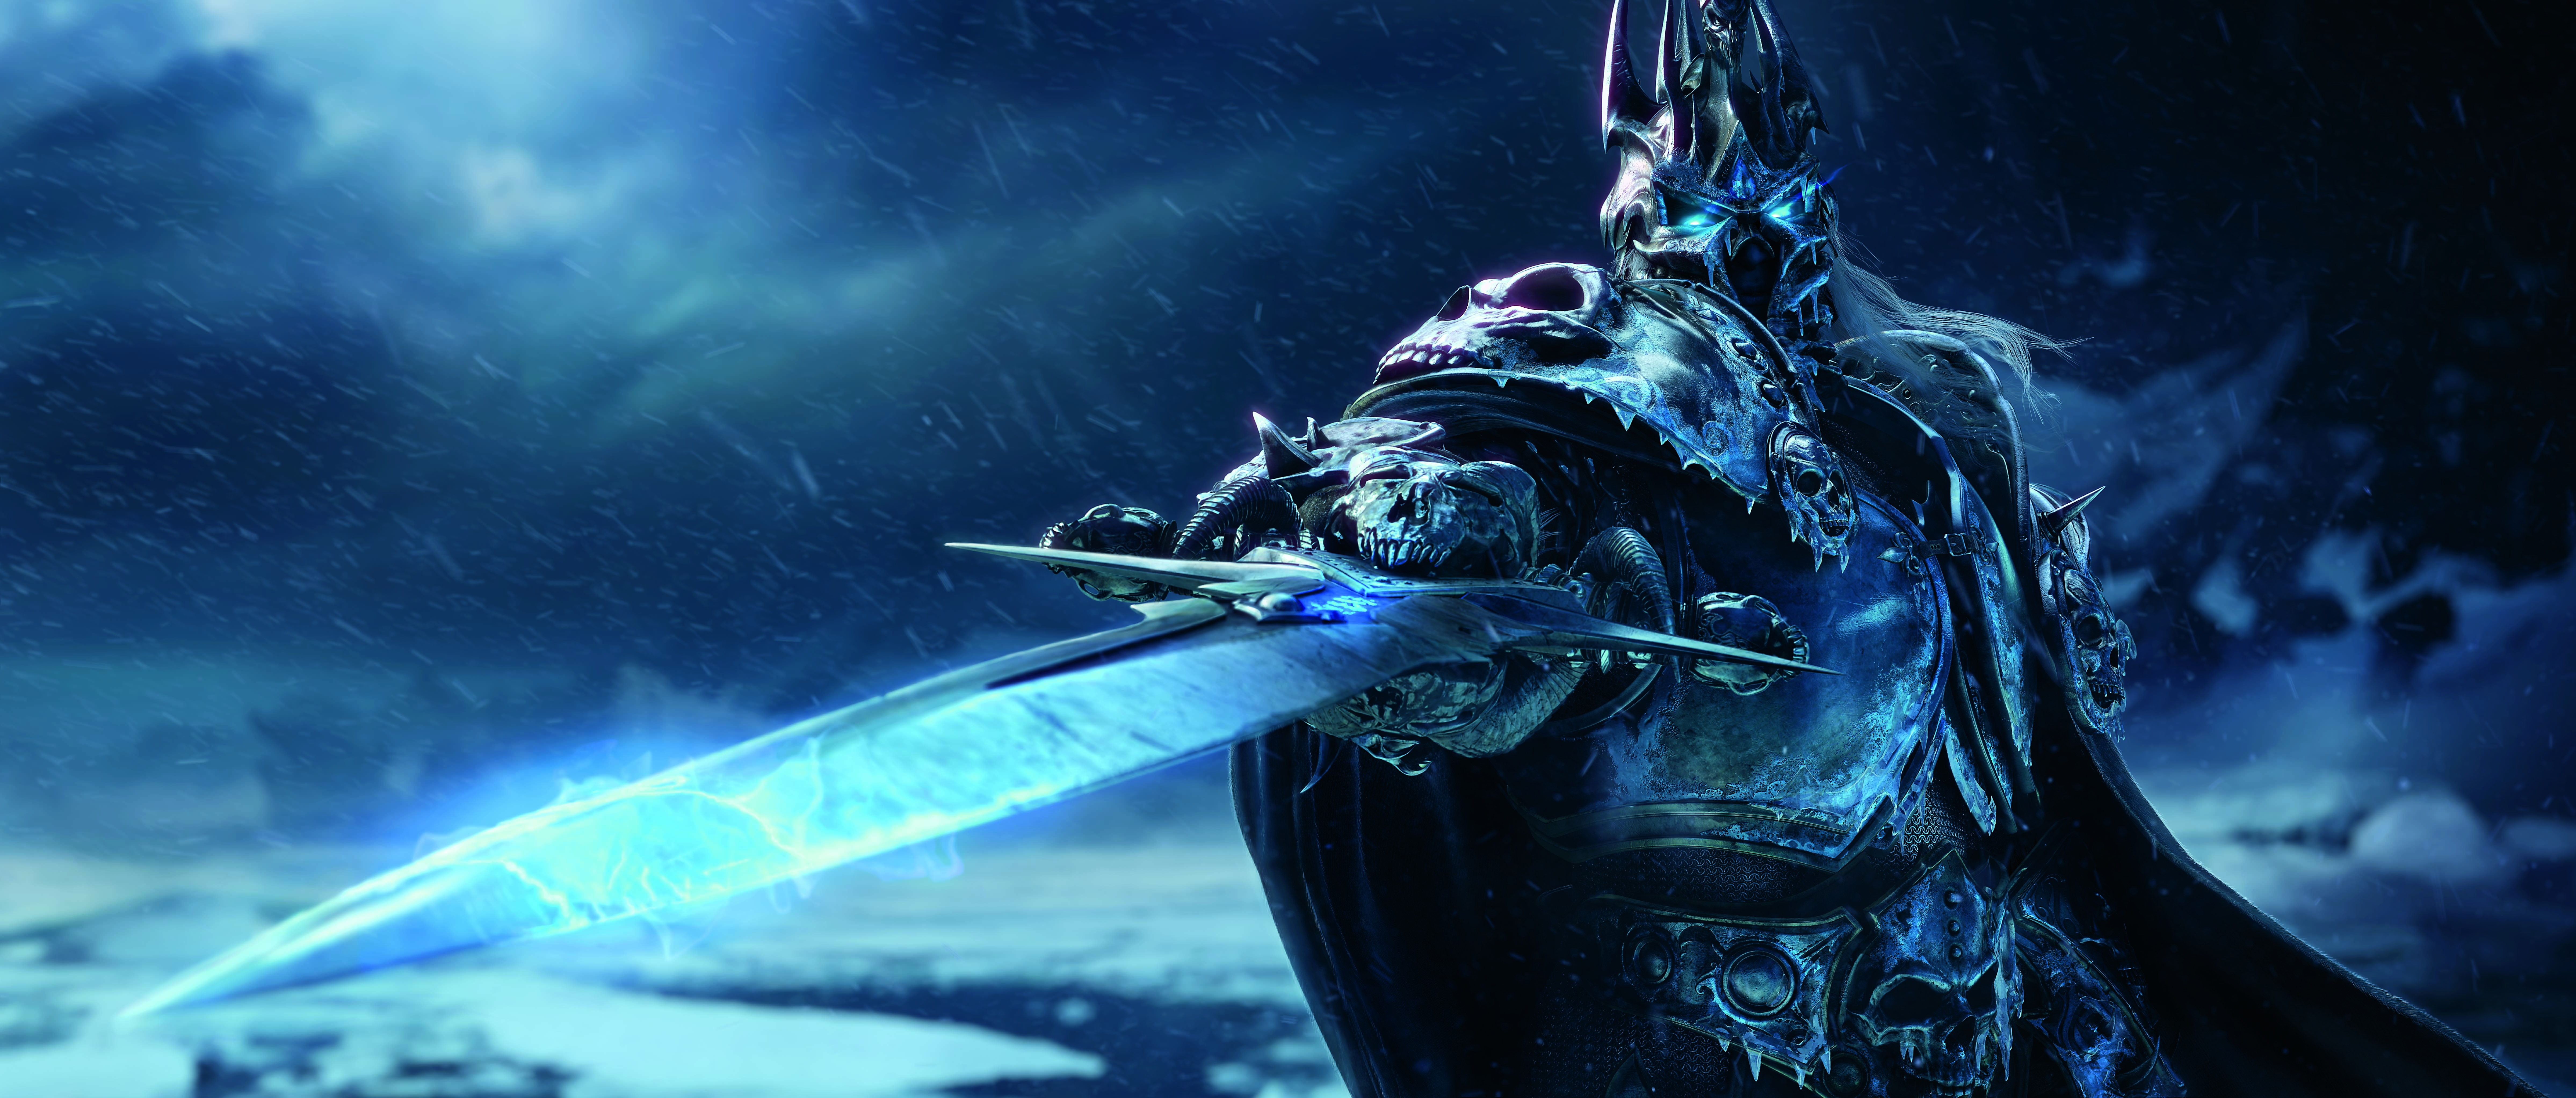 Arthas, The Lich King, in World of Warcraft Classic: Wrath of the Lich King